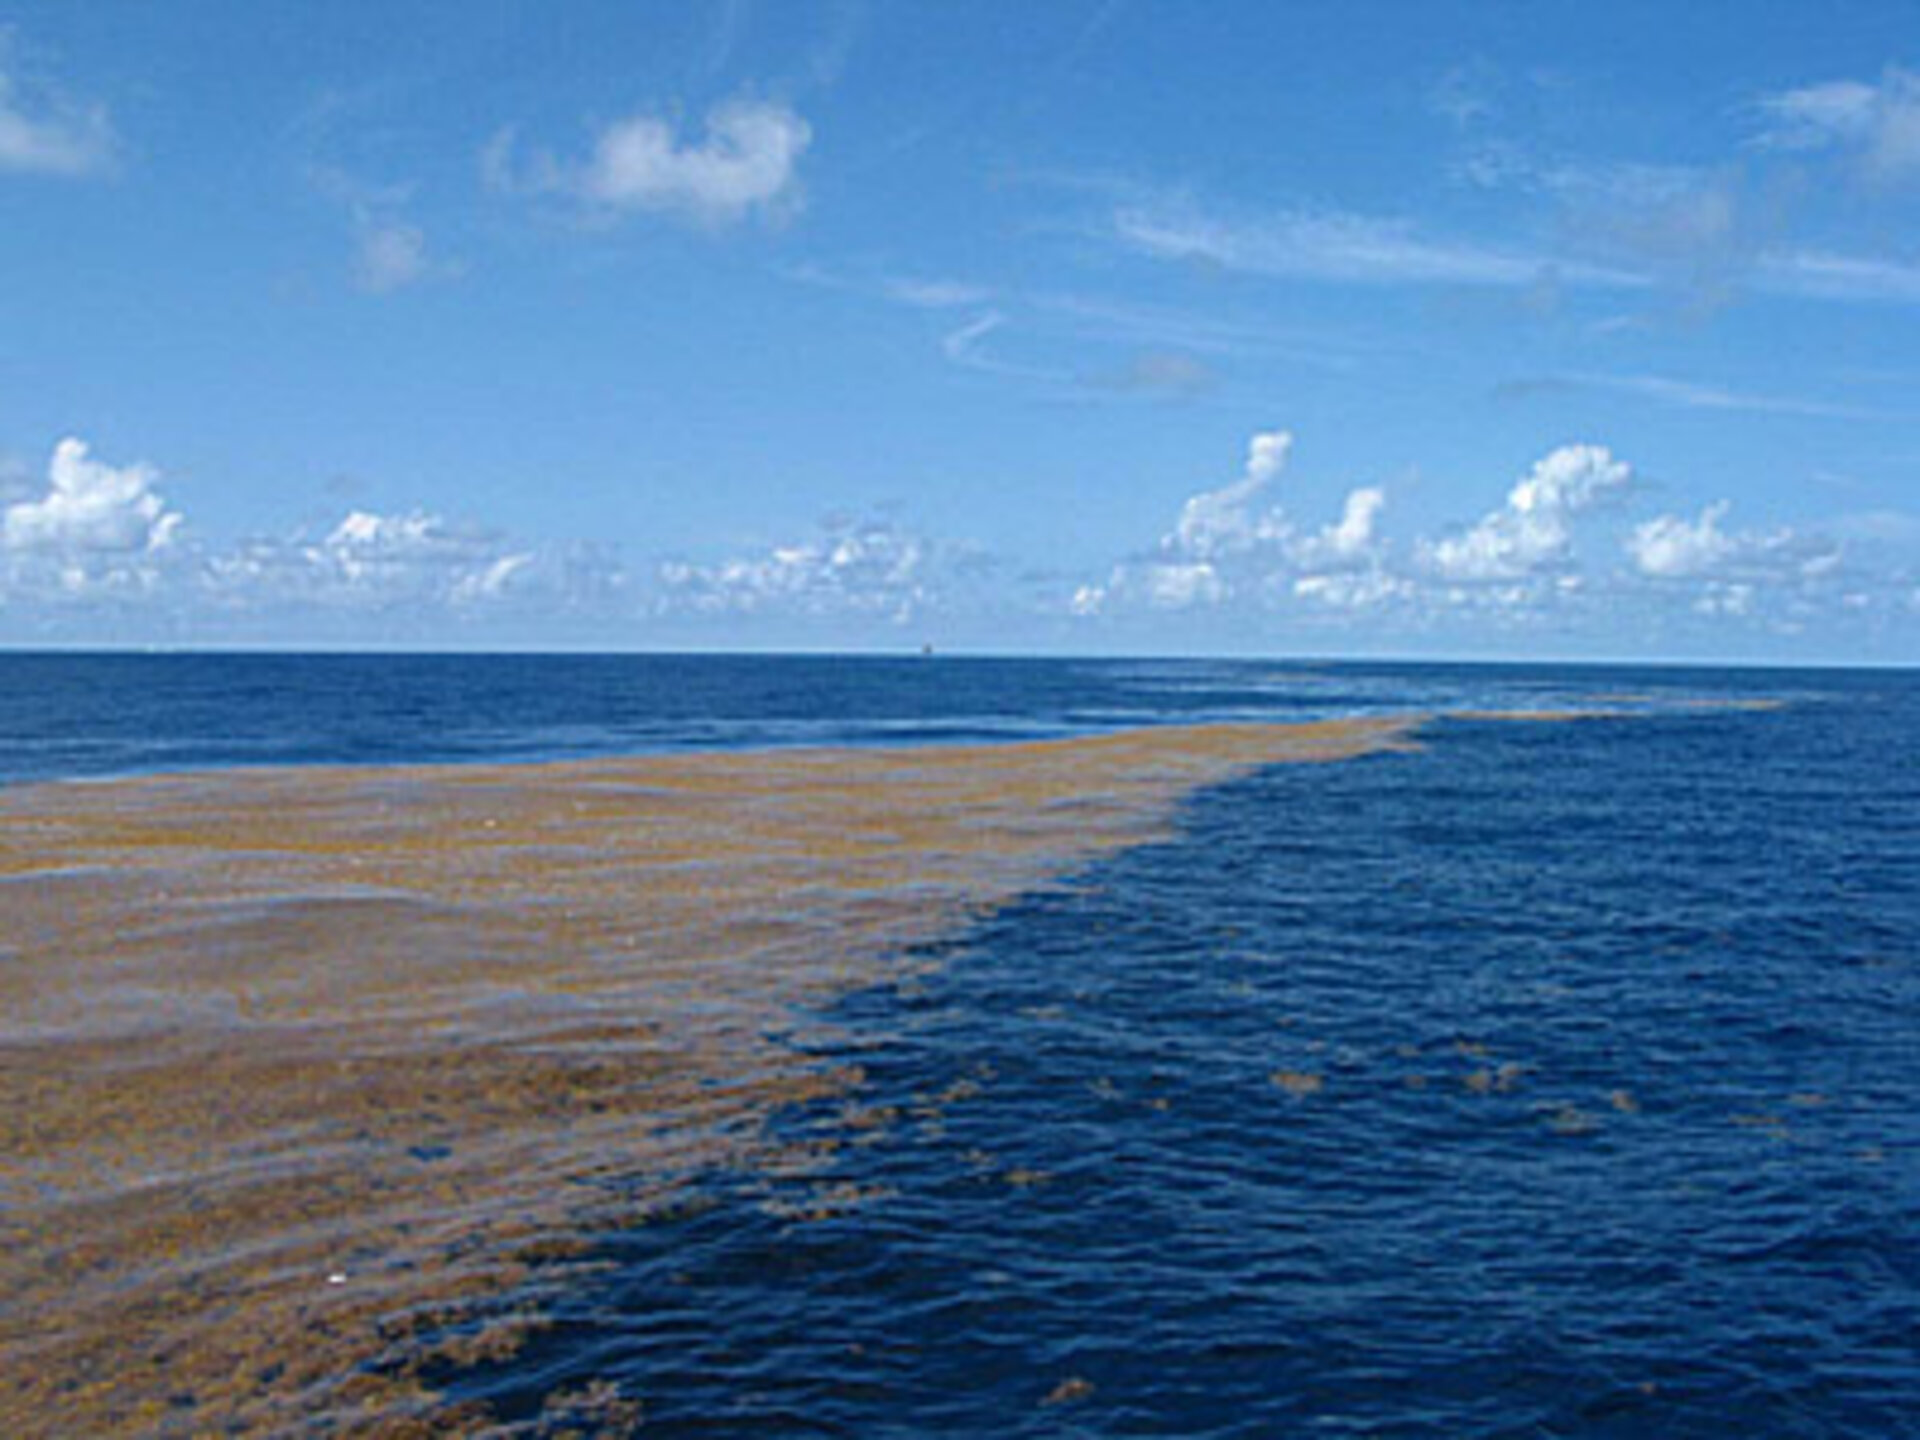 Sargassum in the Gulf of Mexico